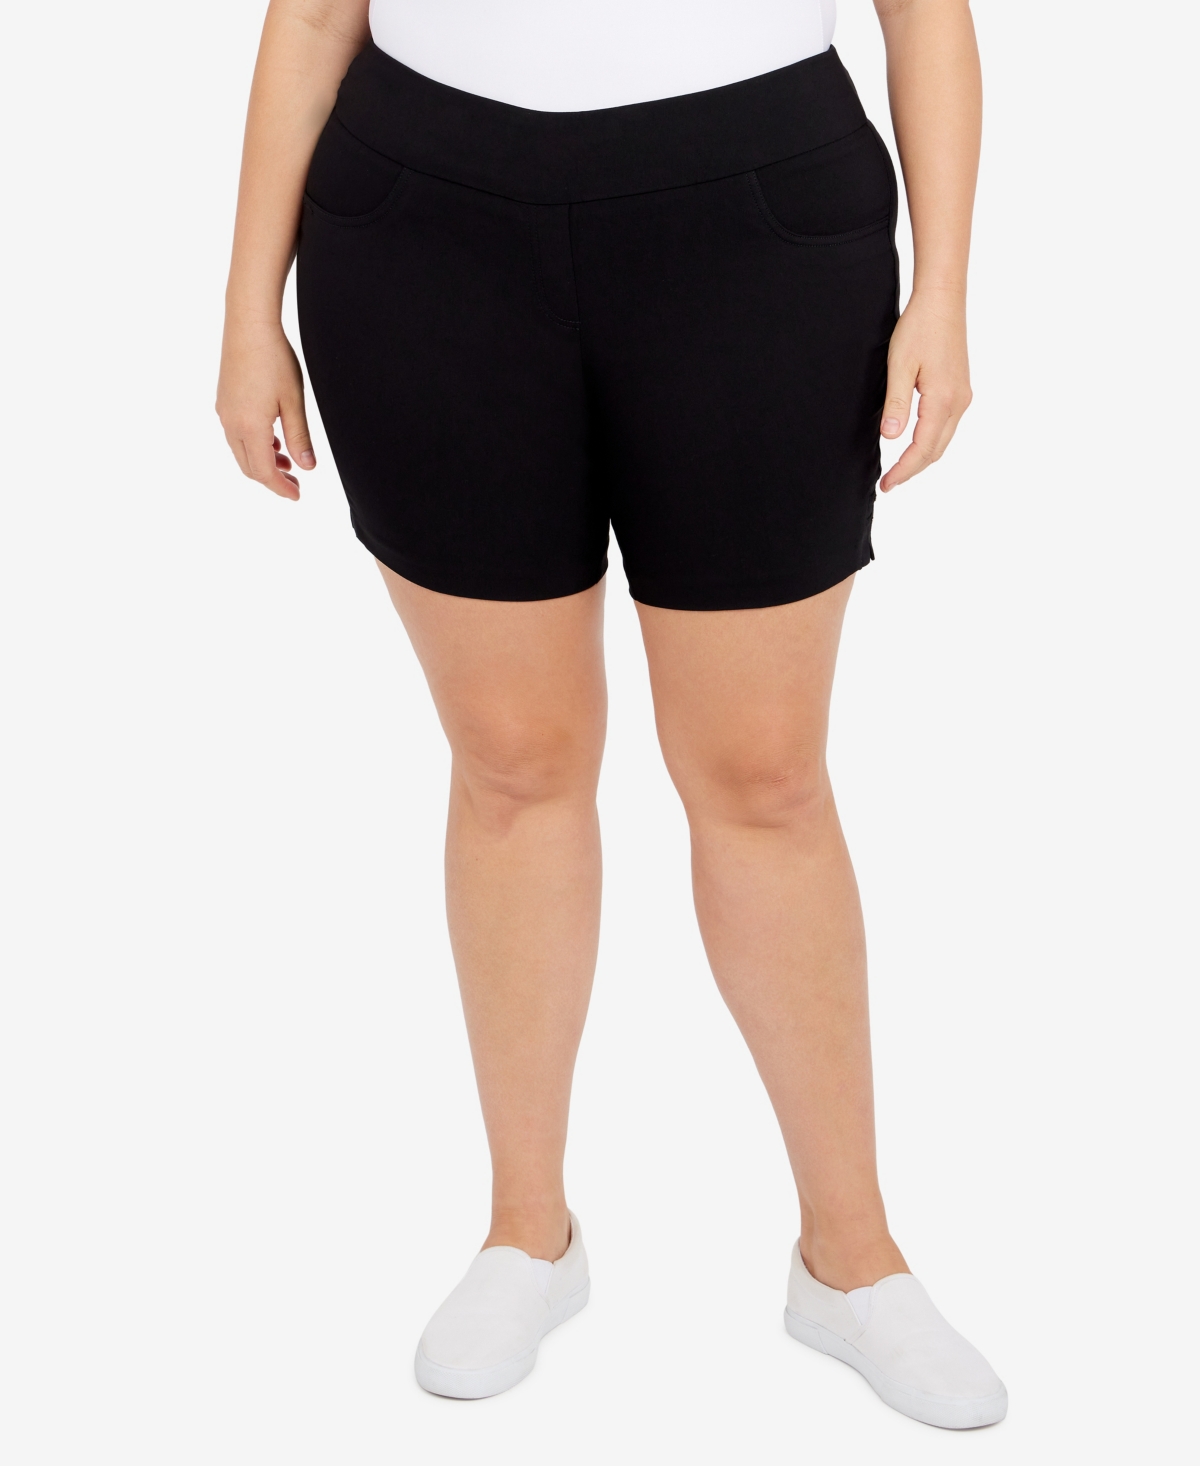 Plus Size Essentials Solid Color Tech Stretch Shorts with Elastic Waistband - Chino